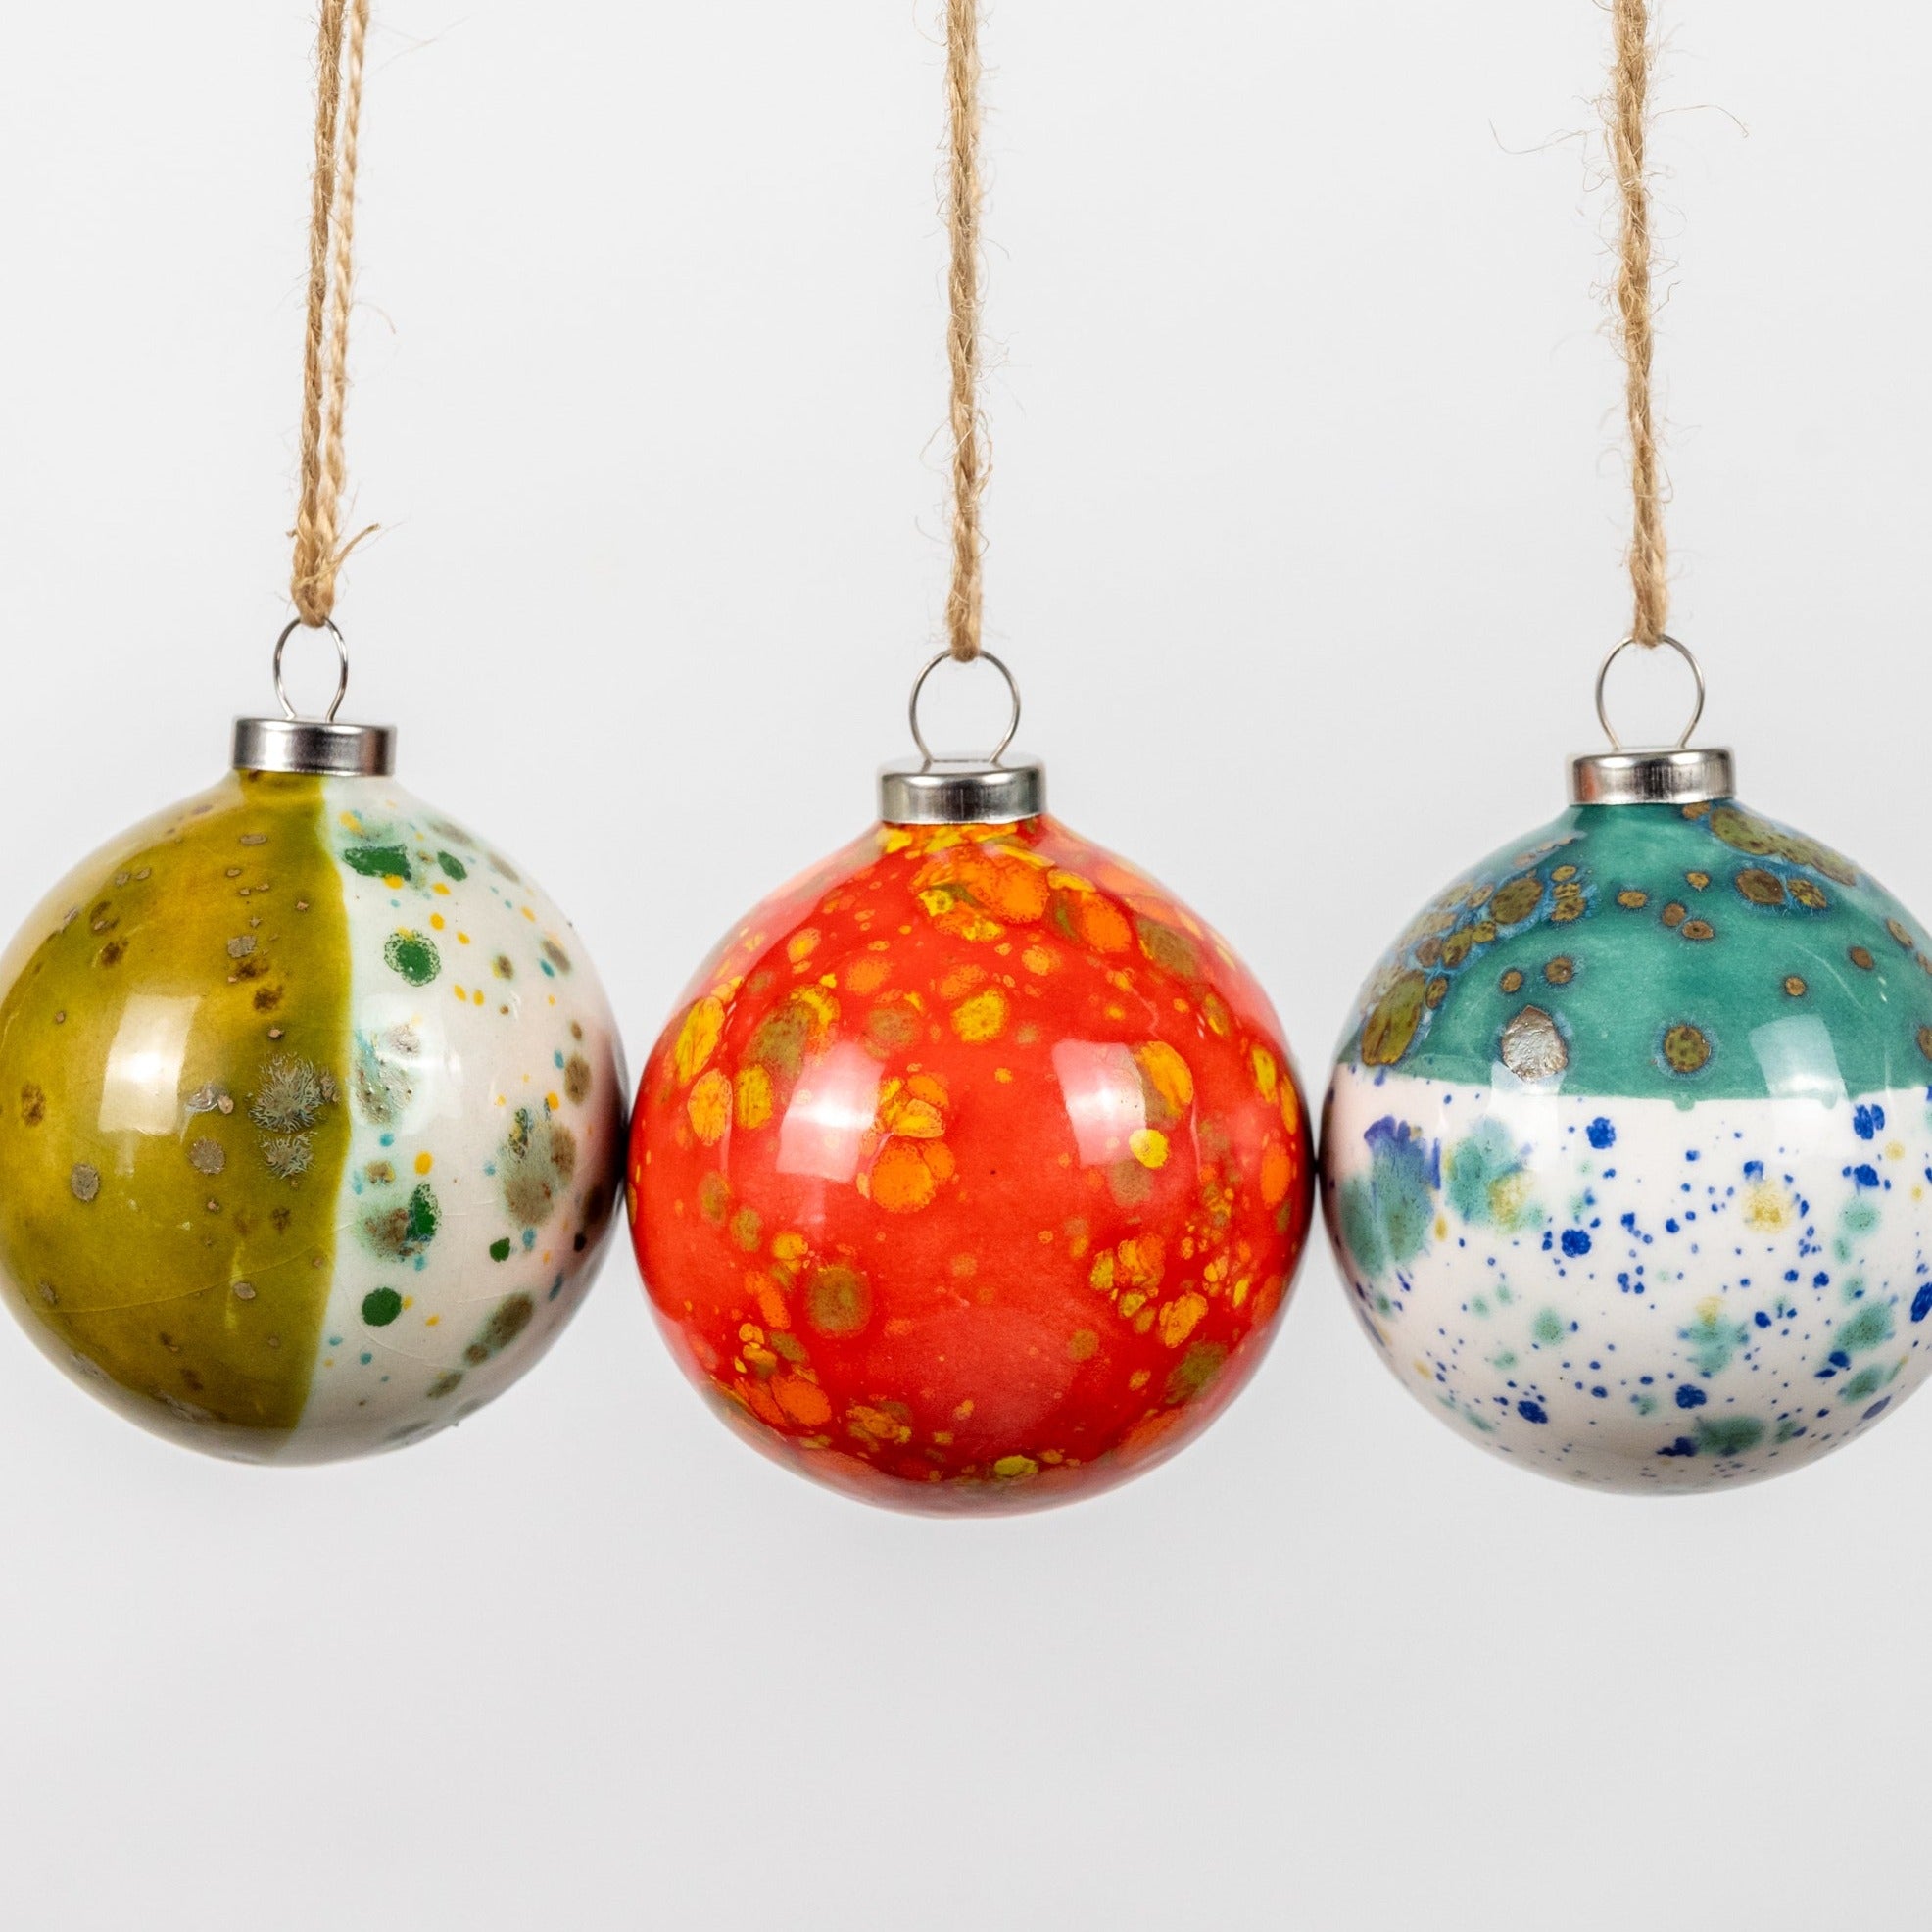 Red Hand-Painted Ceramic Bauble | Round Shape